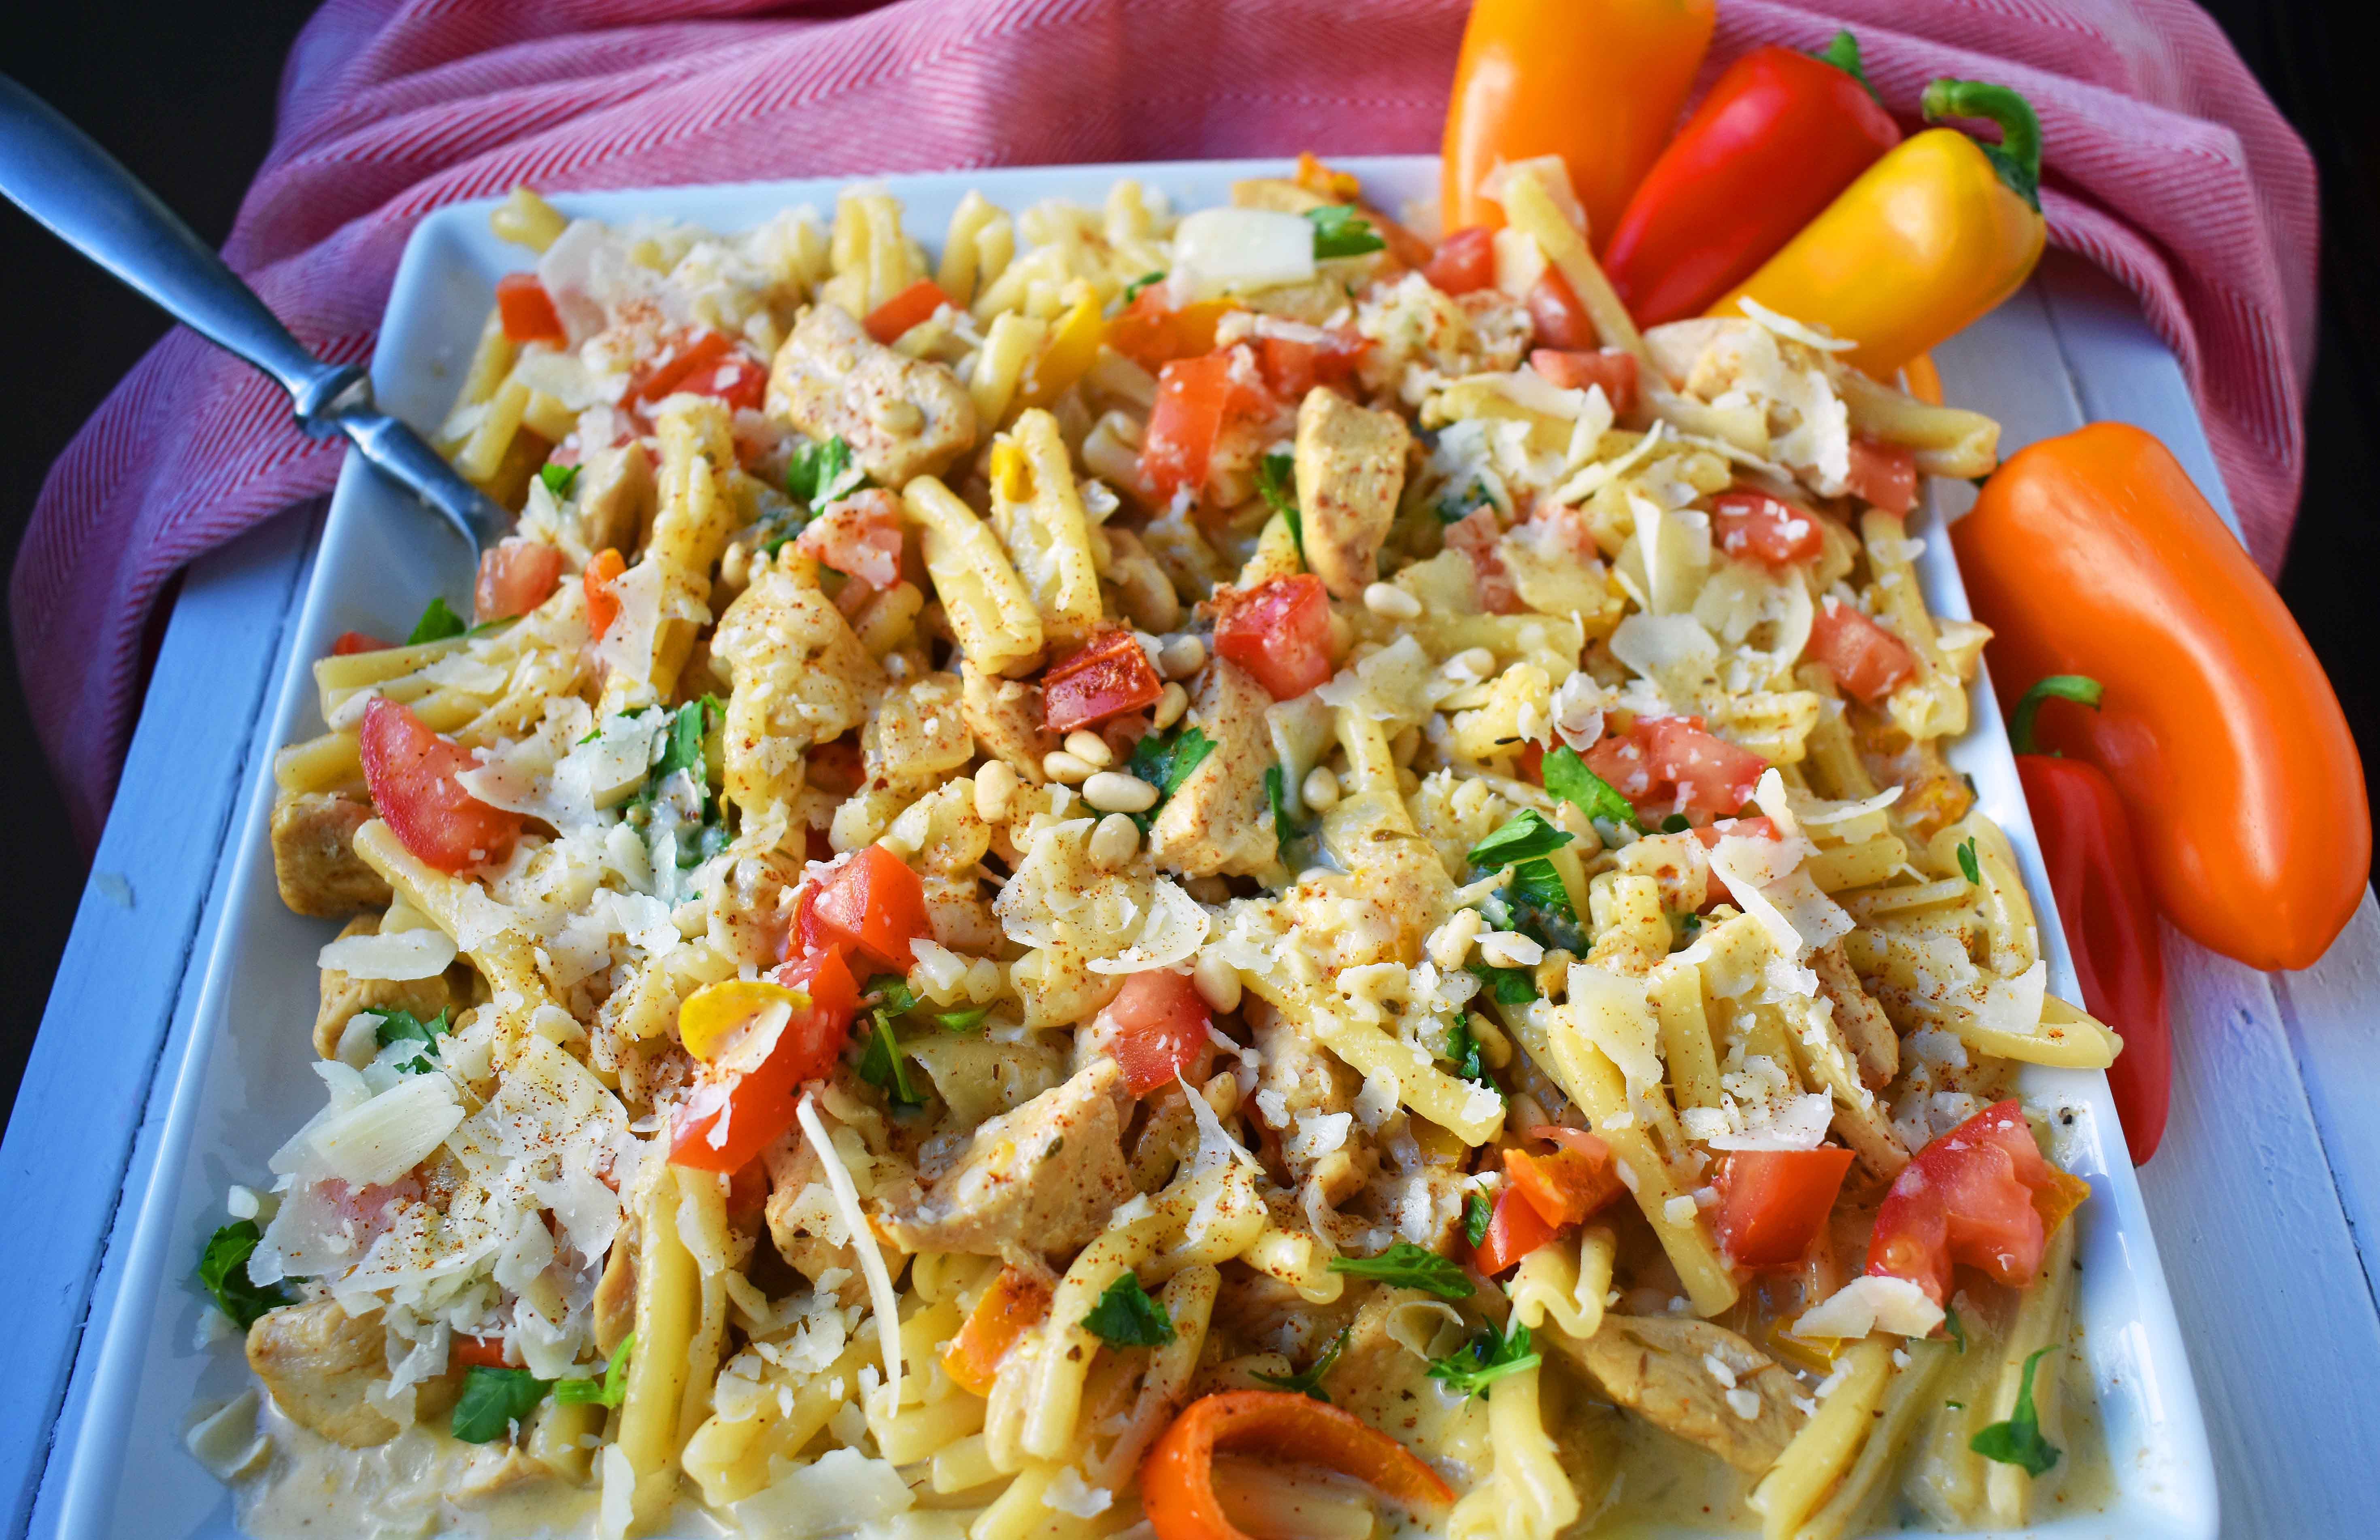 Cajun Louisiana Chicken Pasta made with onions, peppers, chicken, and cajun cream tossed with your favorite kind of pasta and topped with parmesan cheese and pine nuts. A super flavorful creamy pasta dish. www.modernhoney.com